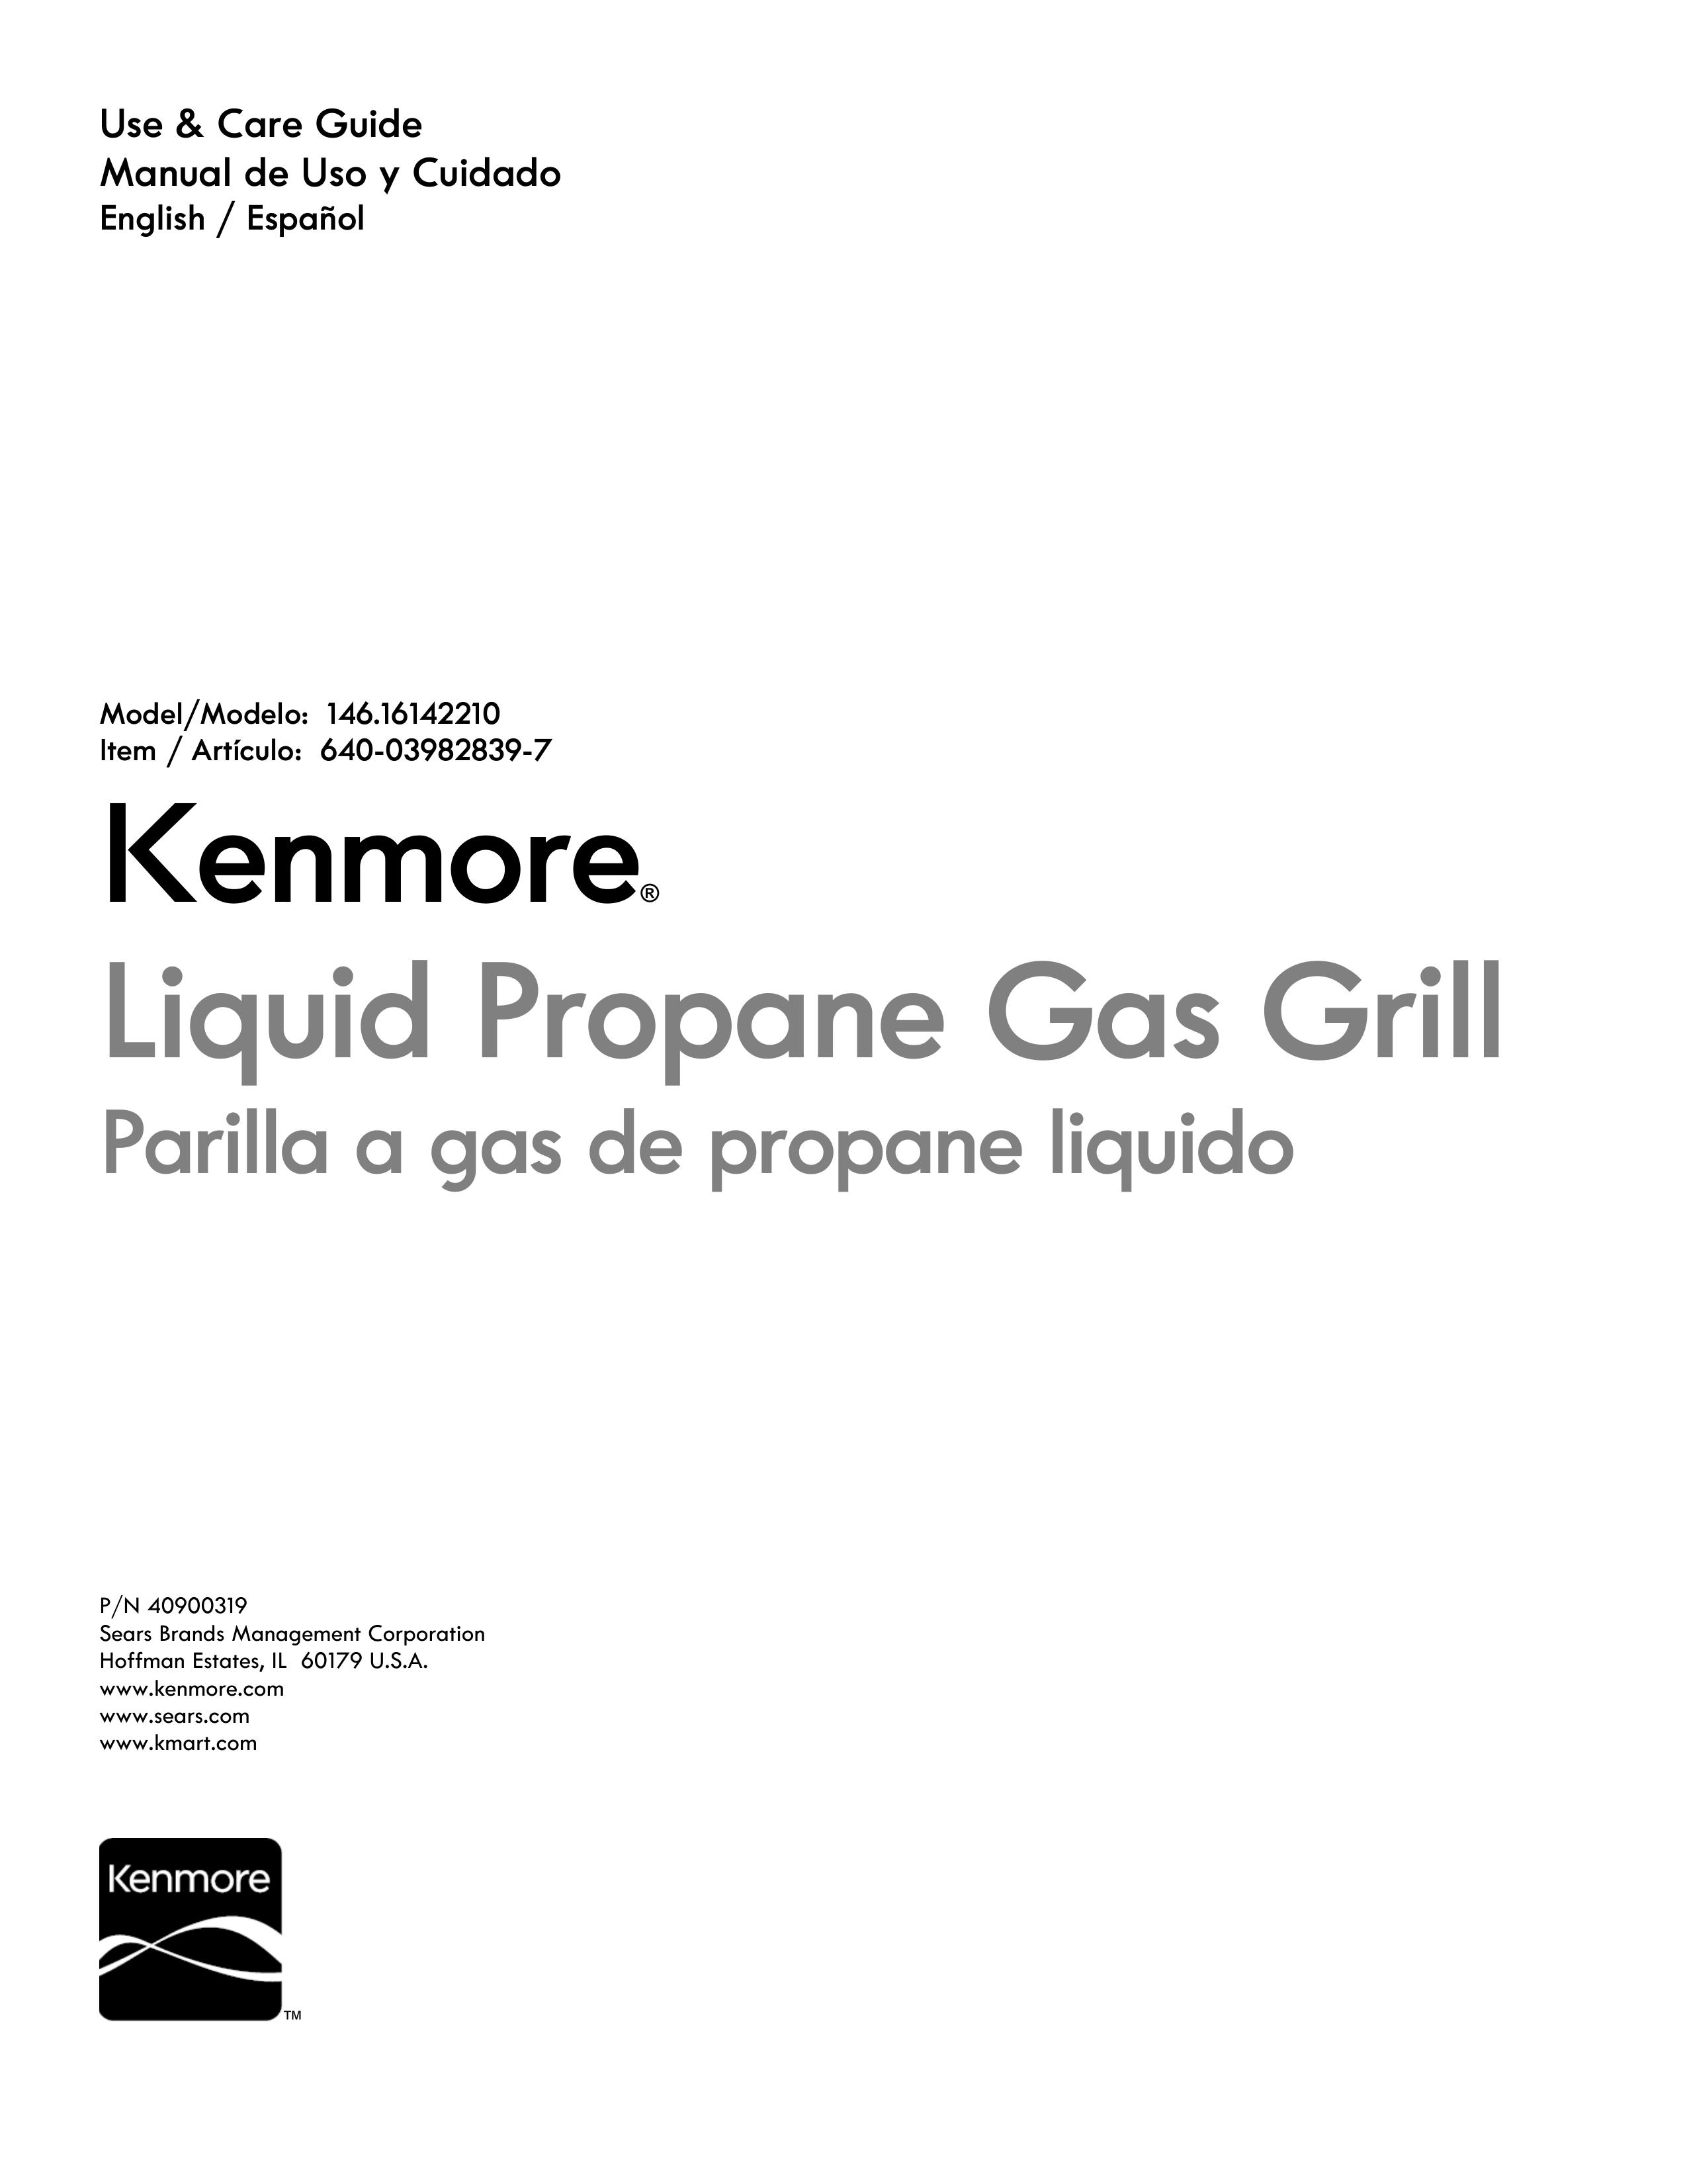 Kenmore 146.1614221 Gas Grill User Manual